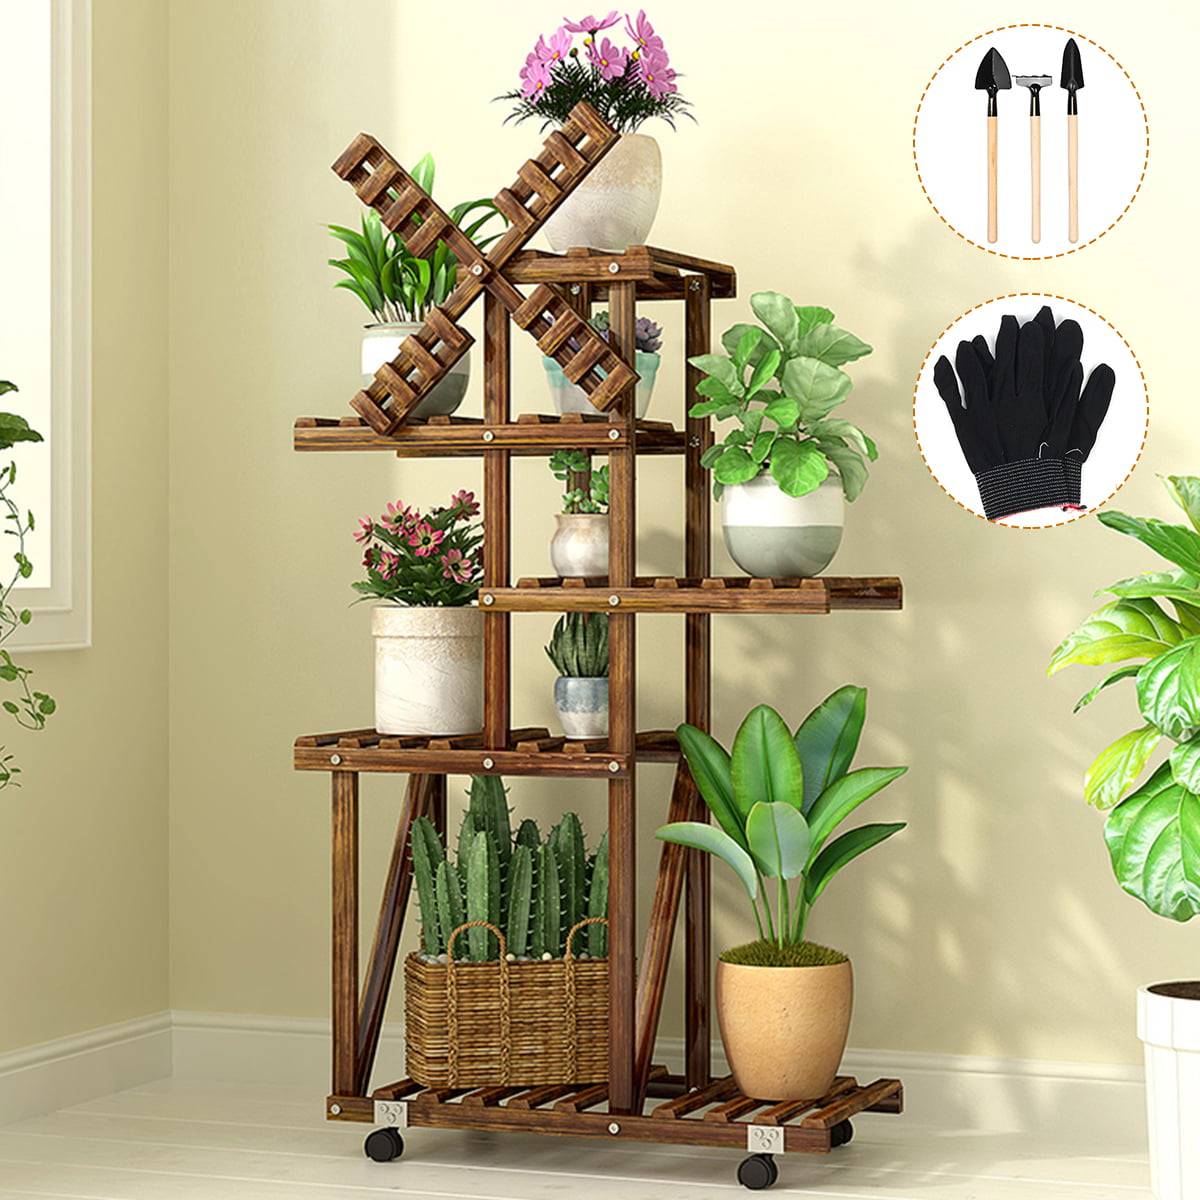 2 Tier Tall Bamboo Flower Plants Rack Heavy Duty Potted Holder Display Corner Stand 4-Tier Indoor Wood Plant Stand Shelf 2 Level for Living Room Pot Plants